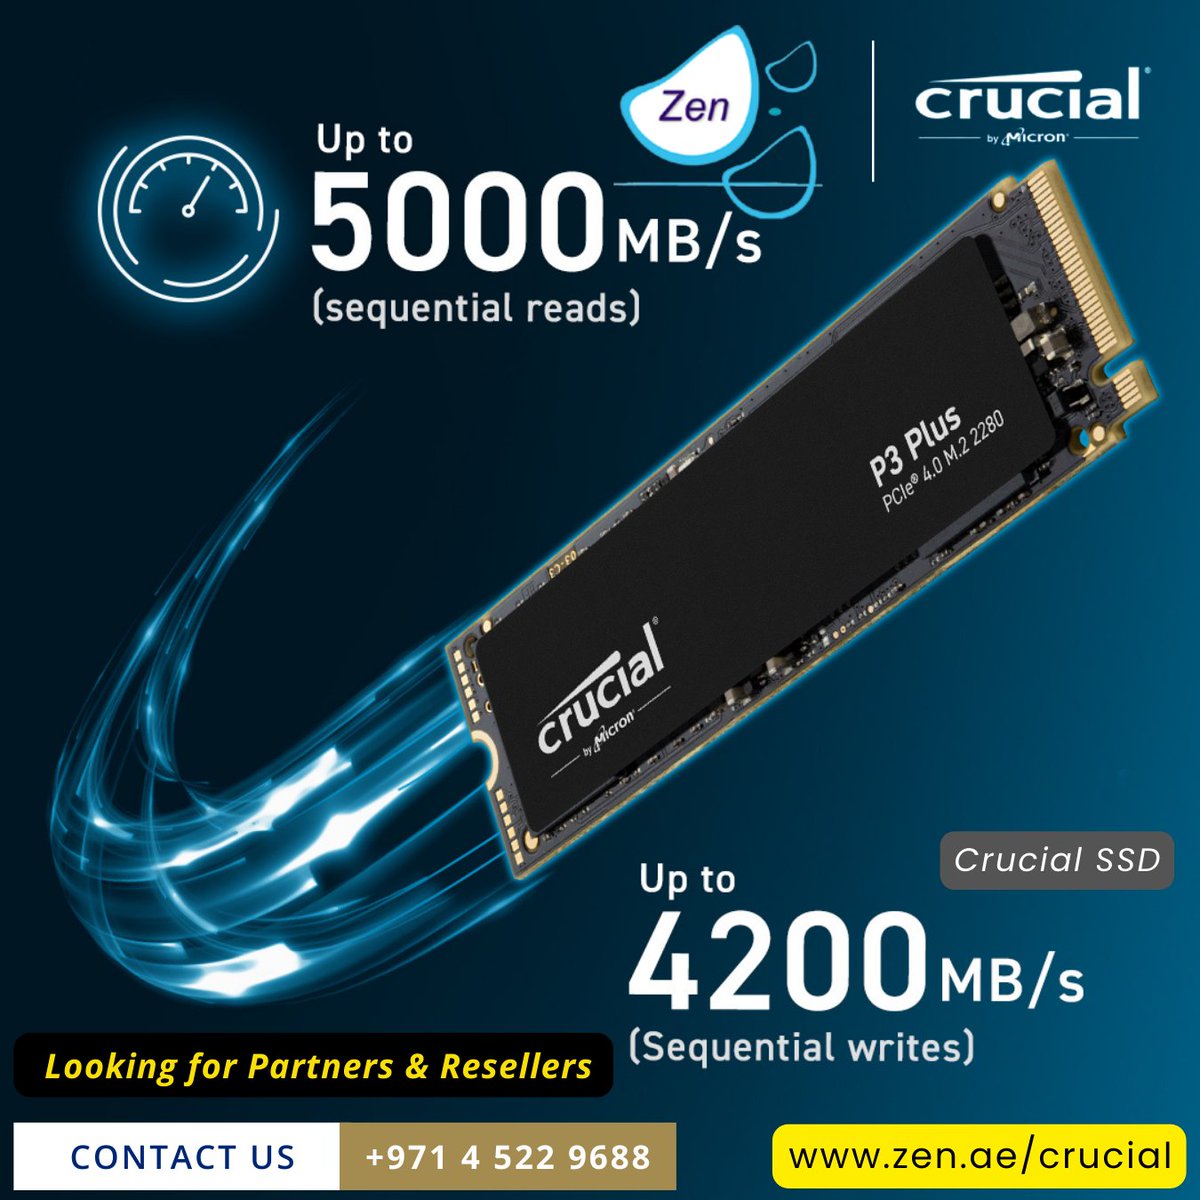 #crucial Crucial SSD 

Looking for partners & resellers.

smpl.is/92w2u

#3cx #zenitdxb #zenit #businesscommunication #dubaistartup #3cxhosting #simhosting #saudistartups